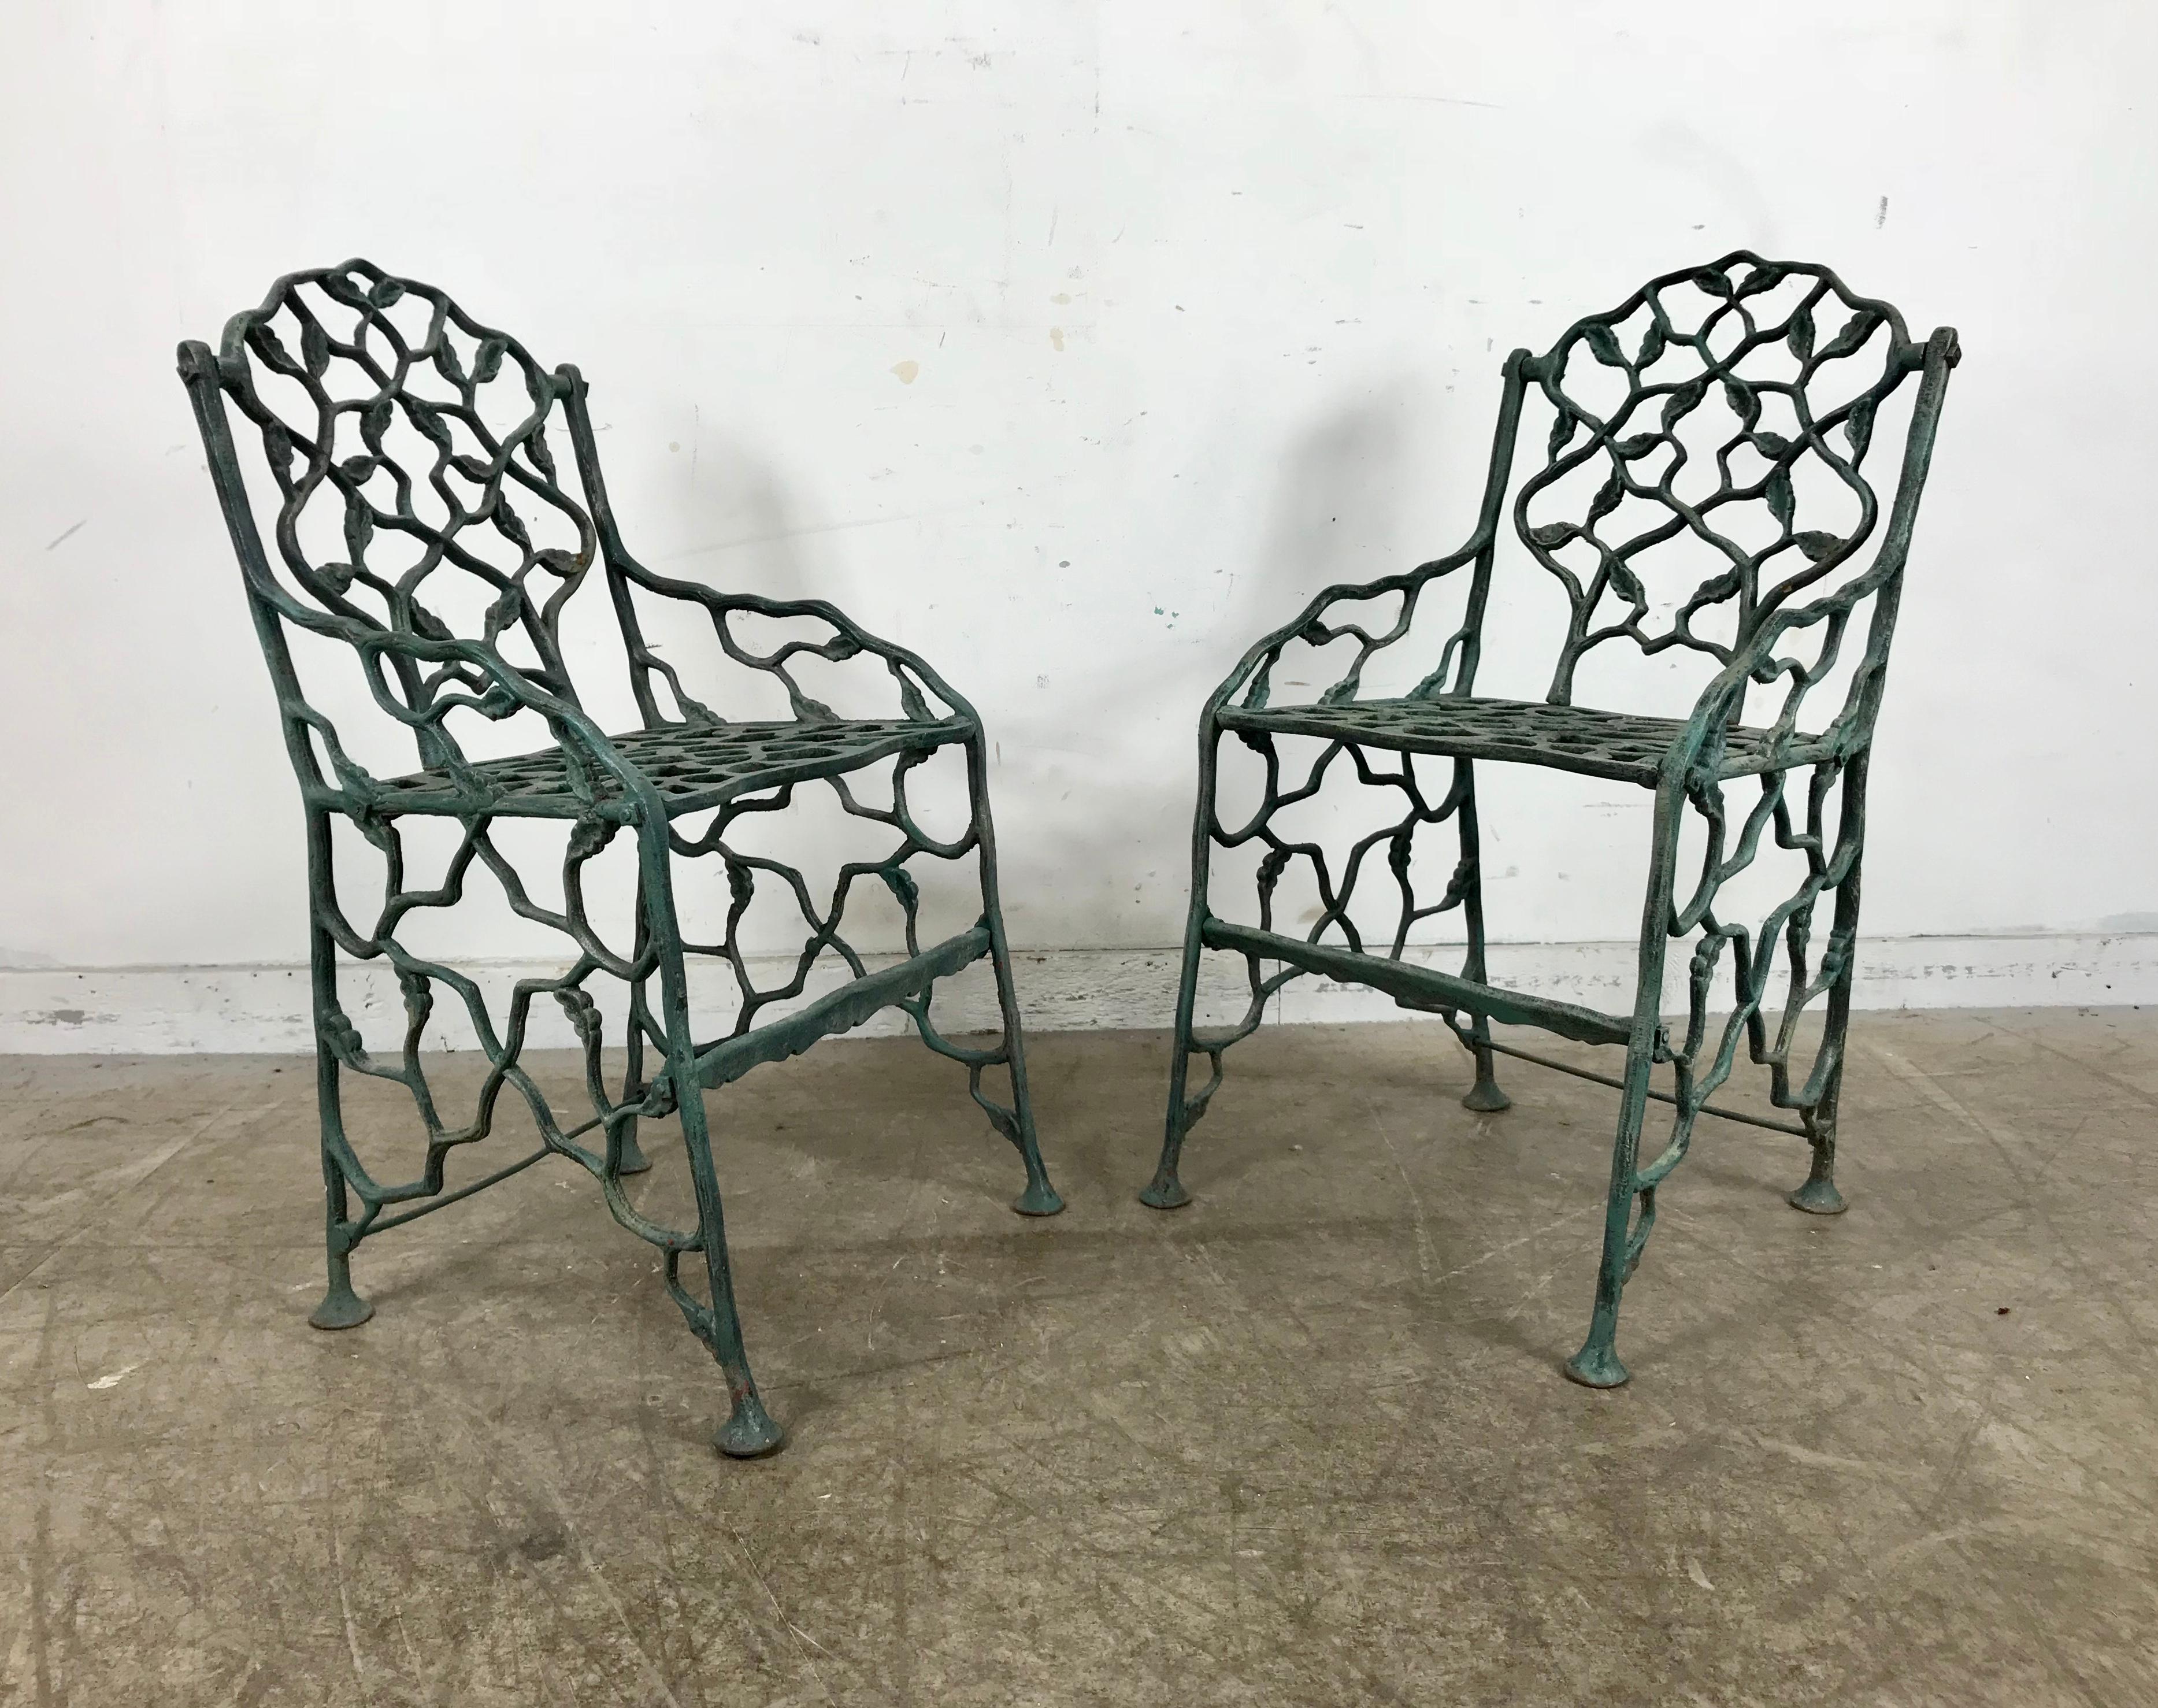 cast iron garden chairs for sale